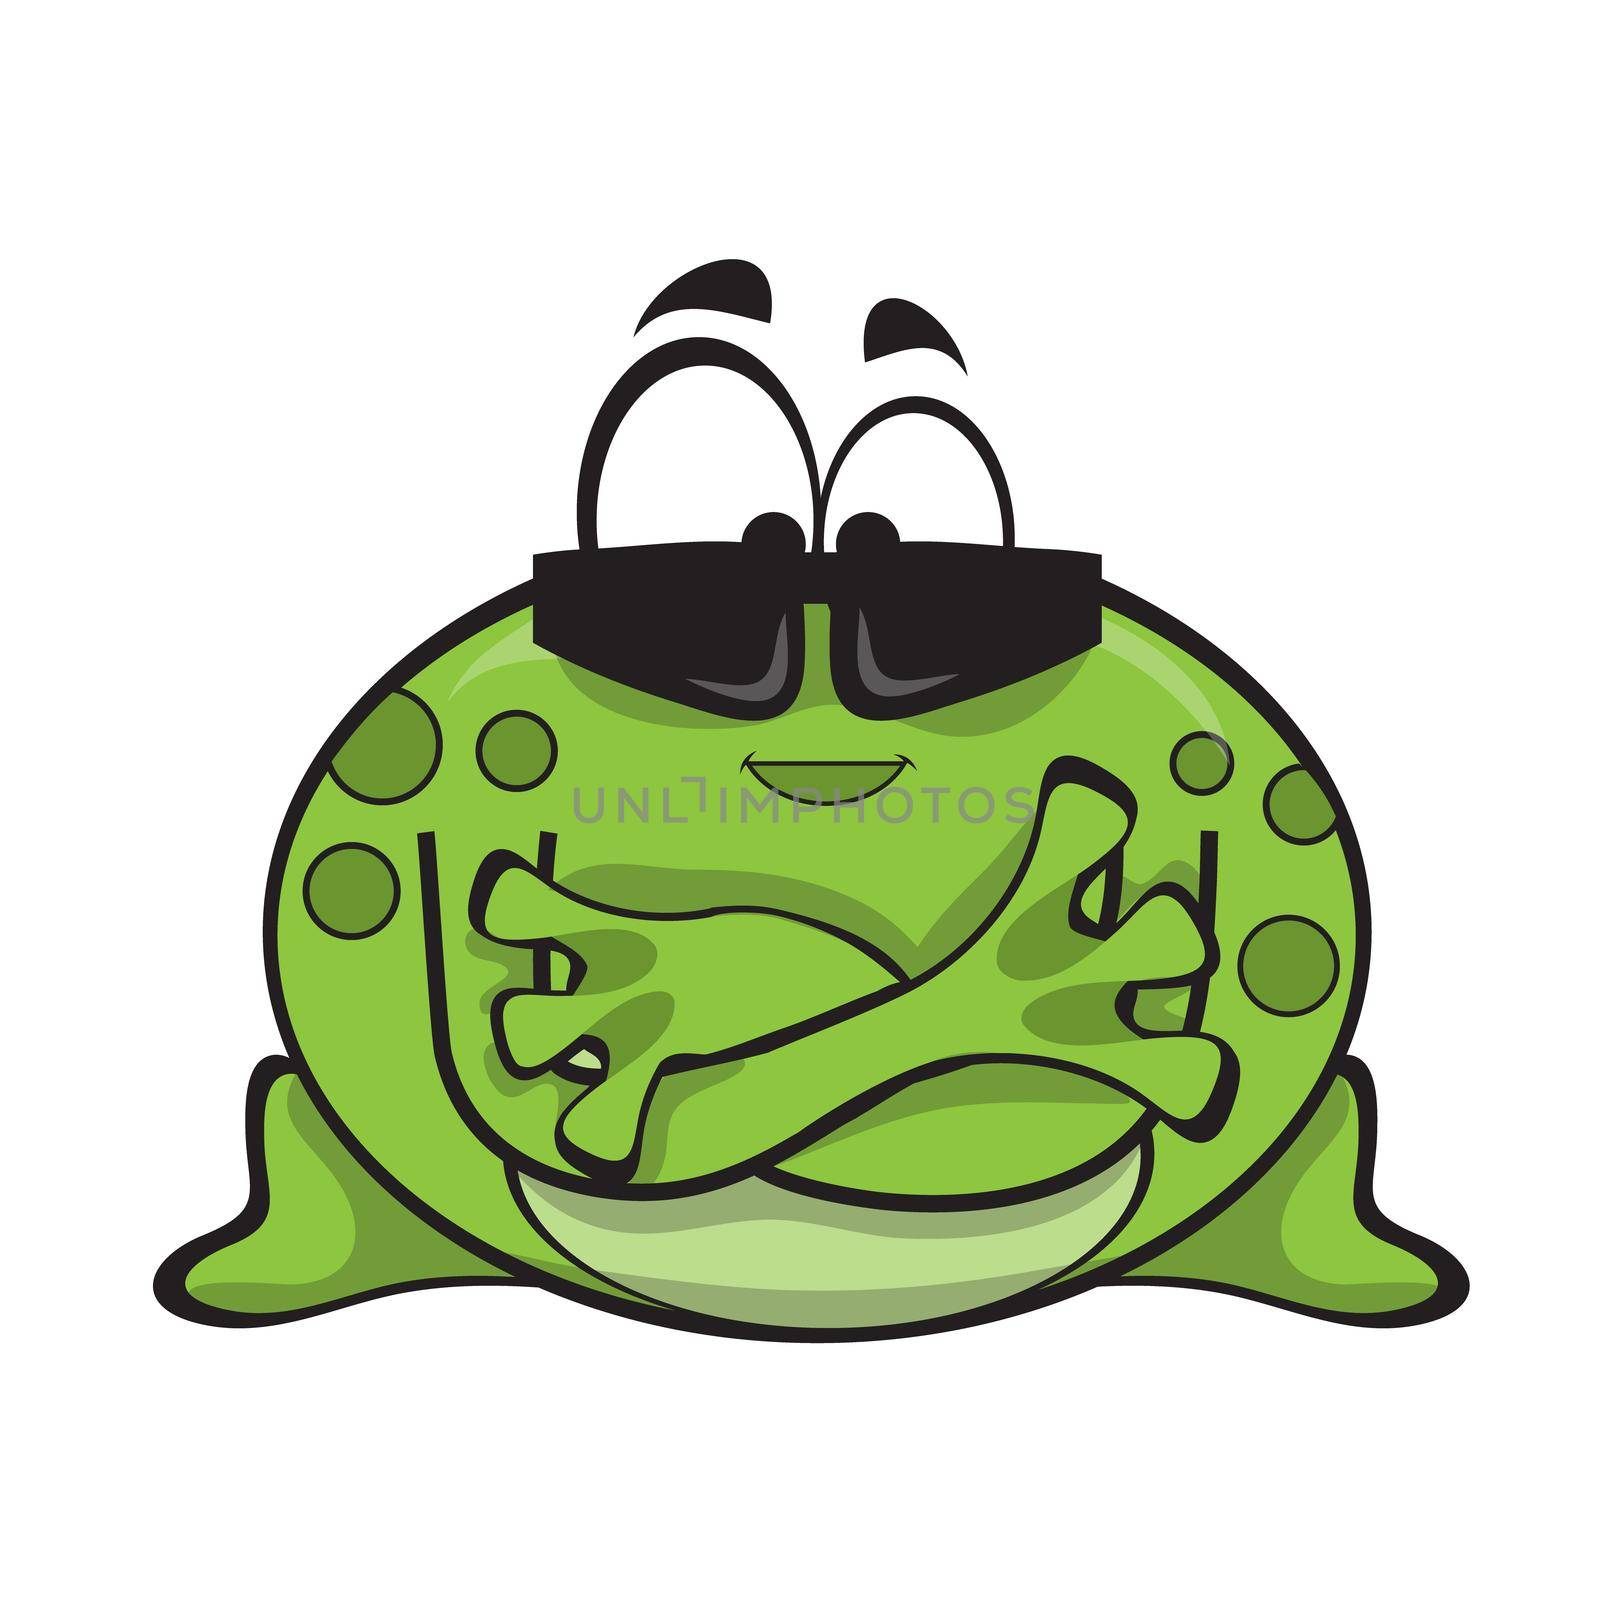 Cartoon frog character wearing sunglasses with crossed arms. Cartoon character on a white background.